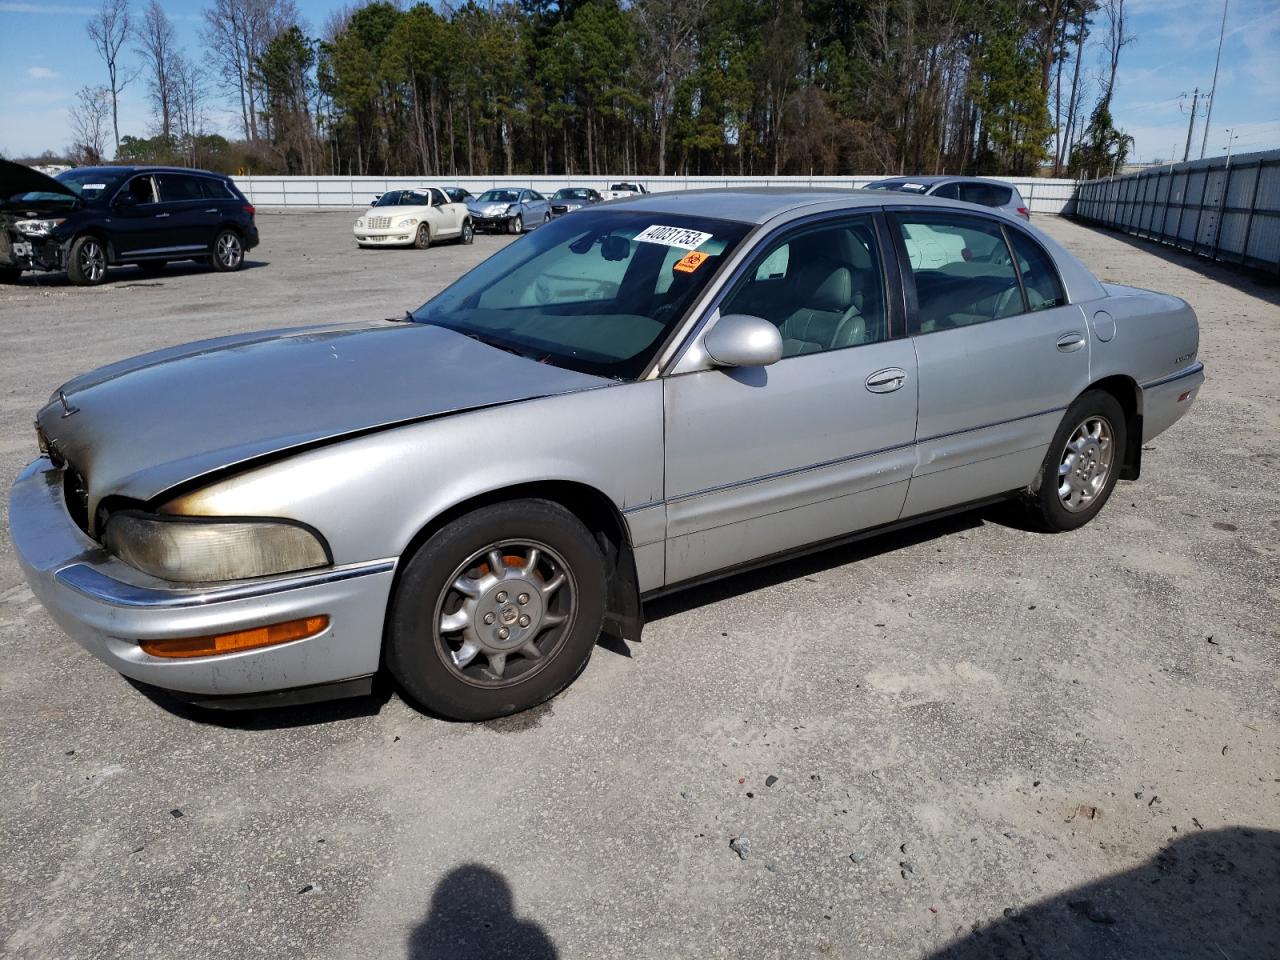 2001 Buick Park Avenue for sale at Copart Dunn, NC Lot #40031*** |  SalvageReseller.com